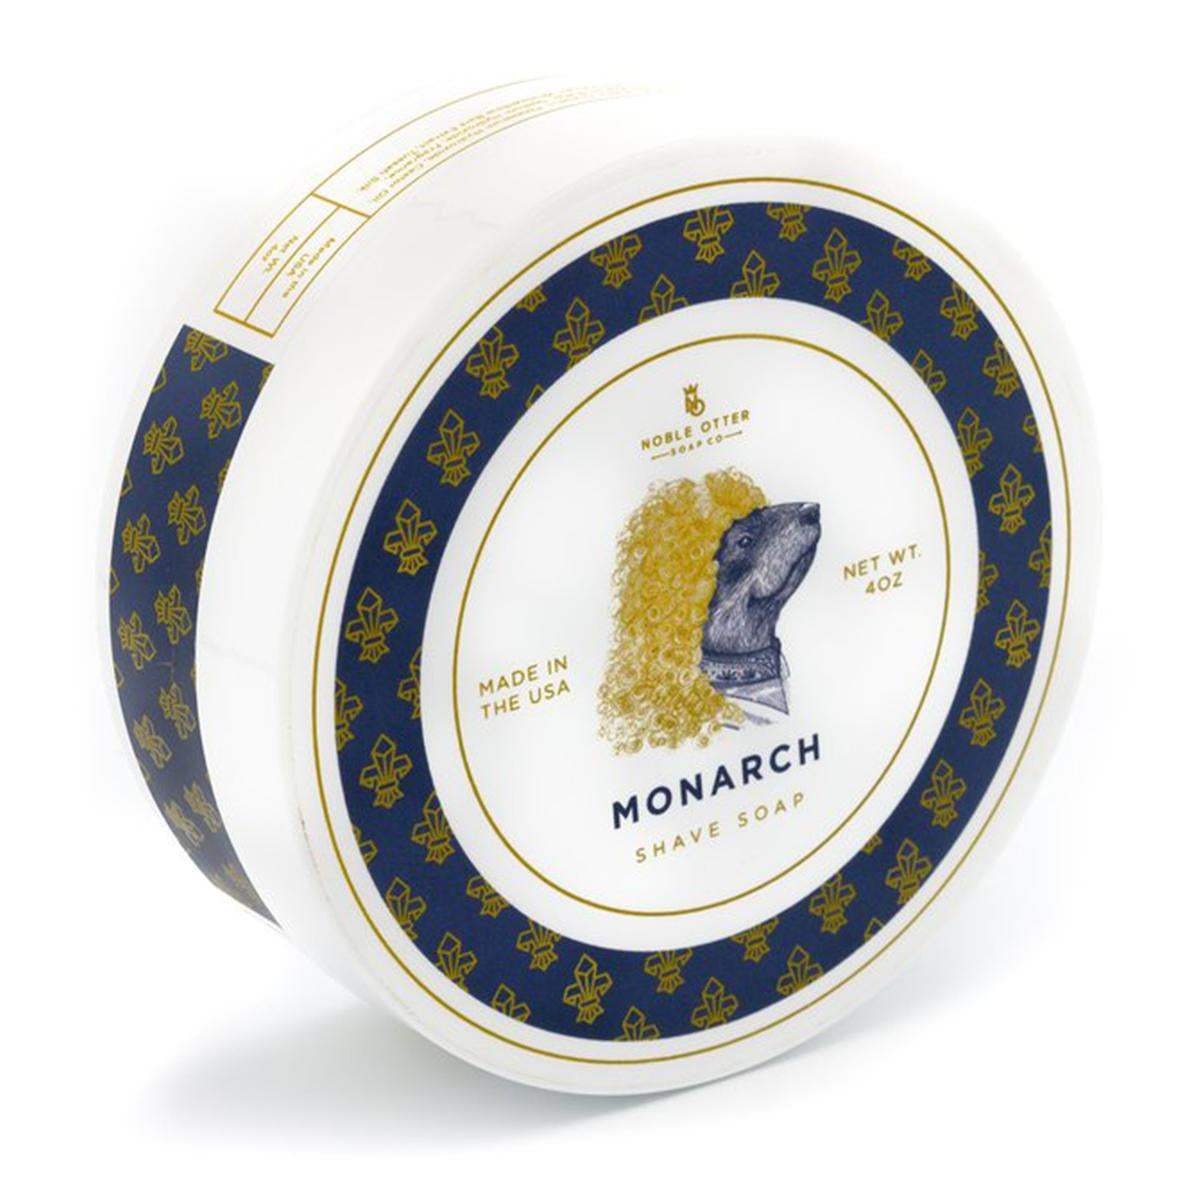 Primary image of Monarch Shaving Soap